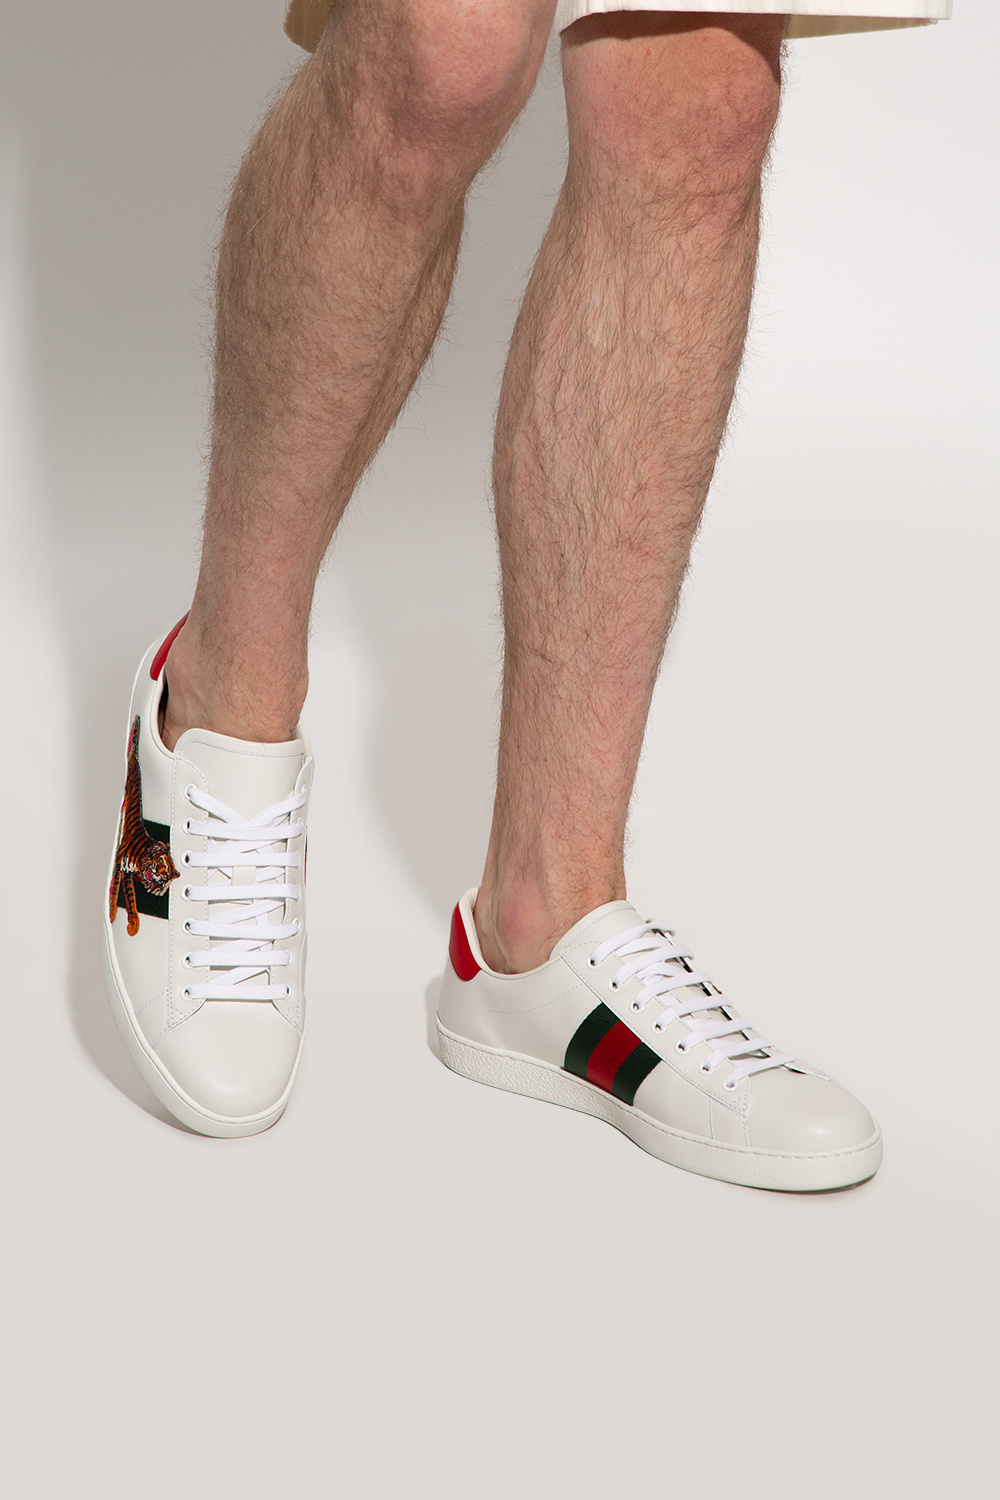 Gucci The 'Gucci Tiger' collection sneakers | Men's Shoes |